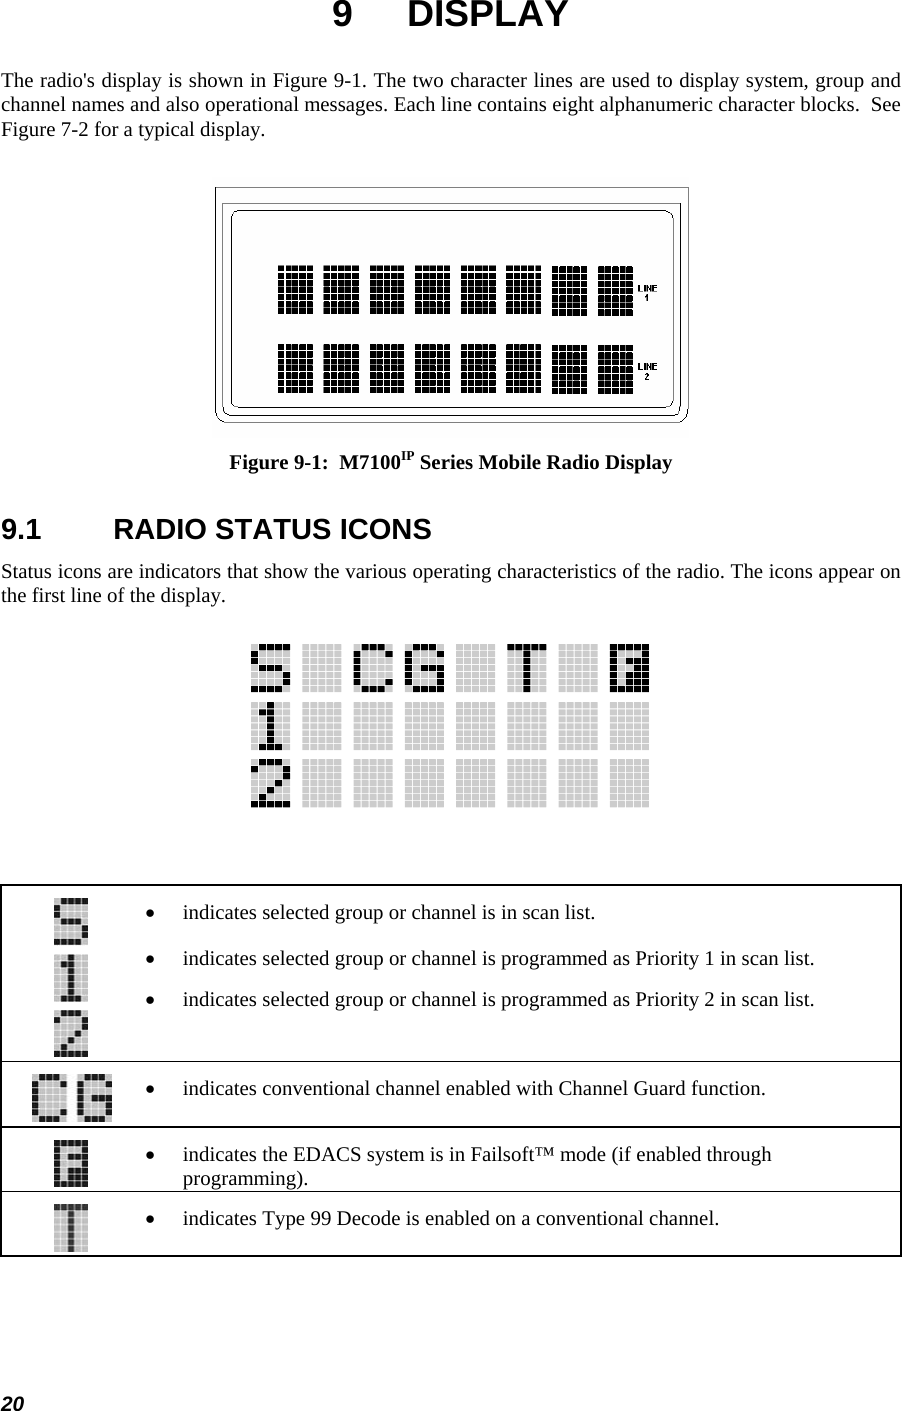  20 9 DISPLAY The radio&apos;s display is shown in Figure 9-1. The two character lines are used to display system, group and channel names and also operational messages. Each line contains eight alphanumeric character blocks.  See Figure 7-2 for a typical display.   Figure 9-1:  M7100IP Series Mobile Radio Display 9.1  RADIO STATUS ICONS Status icons are indicators that show the various operating characteristics of the radio. The icons appear on the first line of the display.     • indicates selected group or channel is in scan list. • indicates selected group or channel is programmed as Priority 1 in scan list. • indicates selected group or channel is programmed as Priority 2 in scan list.   • indicates conventional channel enabled with Channel Guard function.   • indicates the EDACS system is in Failsoft™ mode (if enabled through programming).   • indicates Type 99 Decode is enabled on a conventional channel.  